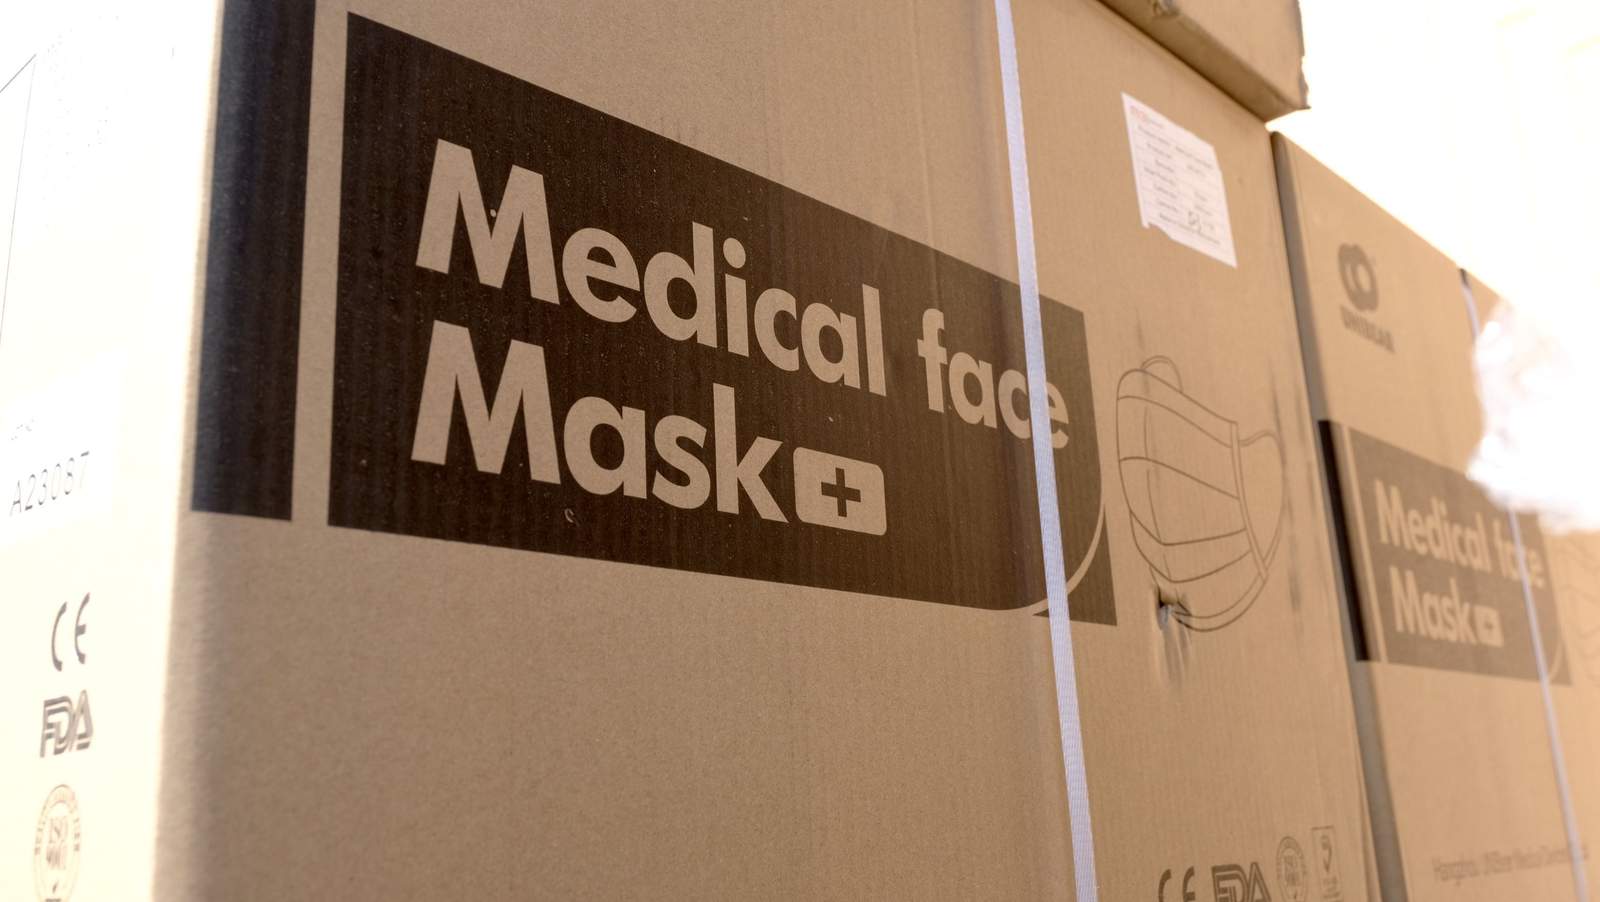 He Removed Labels That Said “Medical Use Prohibited,” Then Tried to Sell Thousands of Masks to Officials Who Distribute to Hospitals